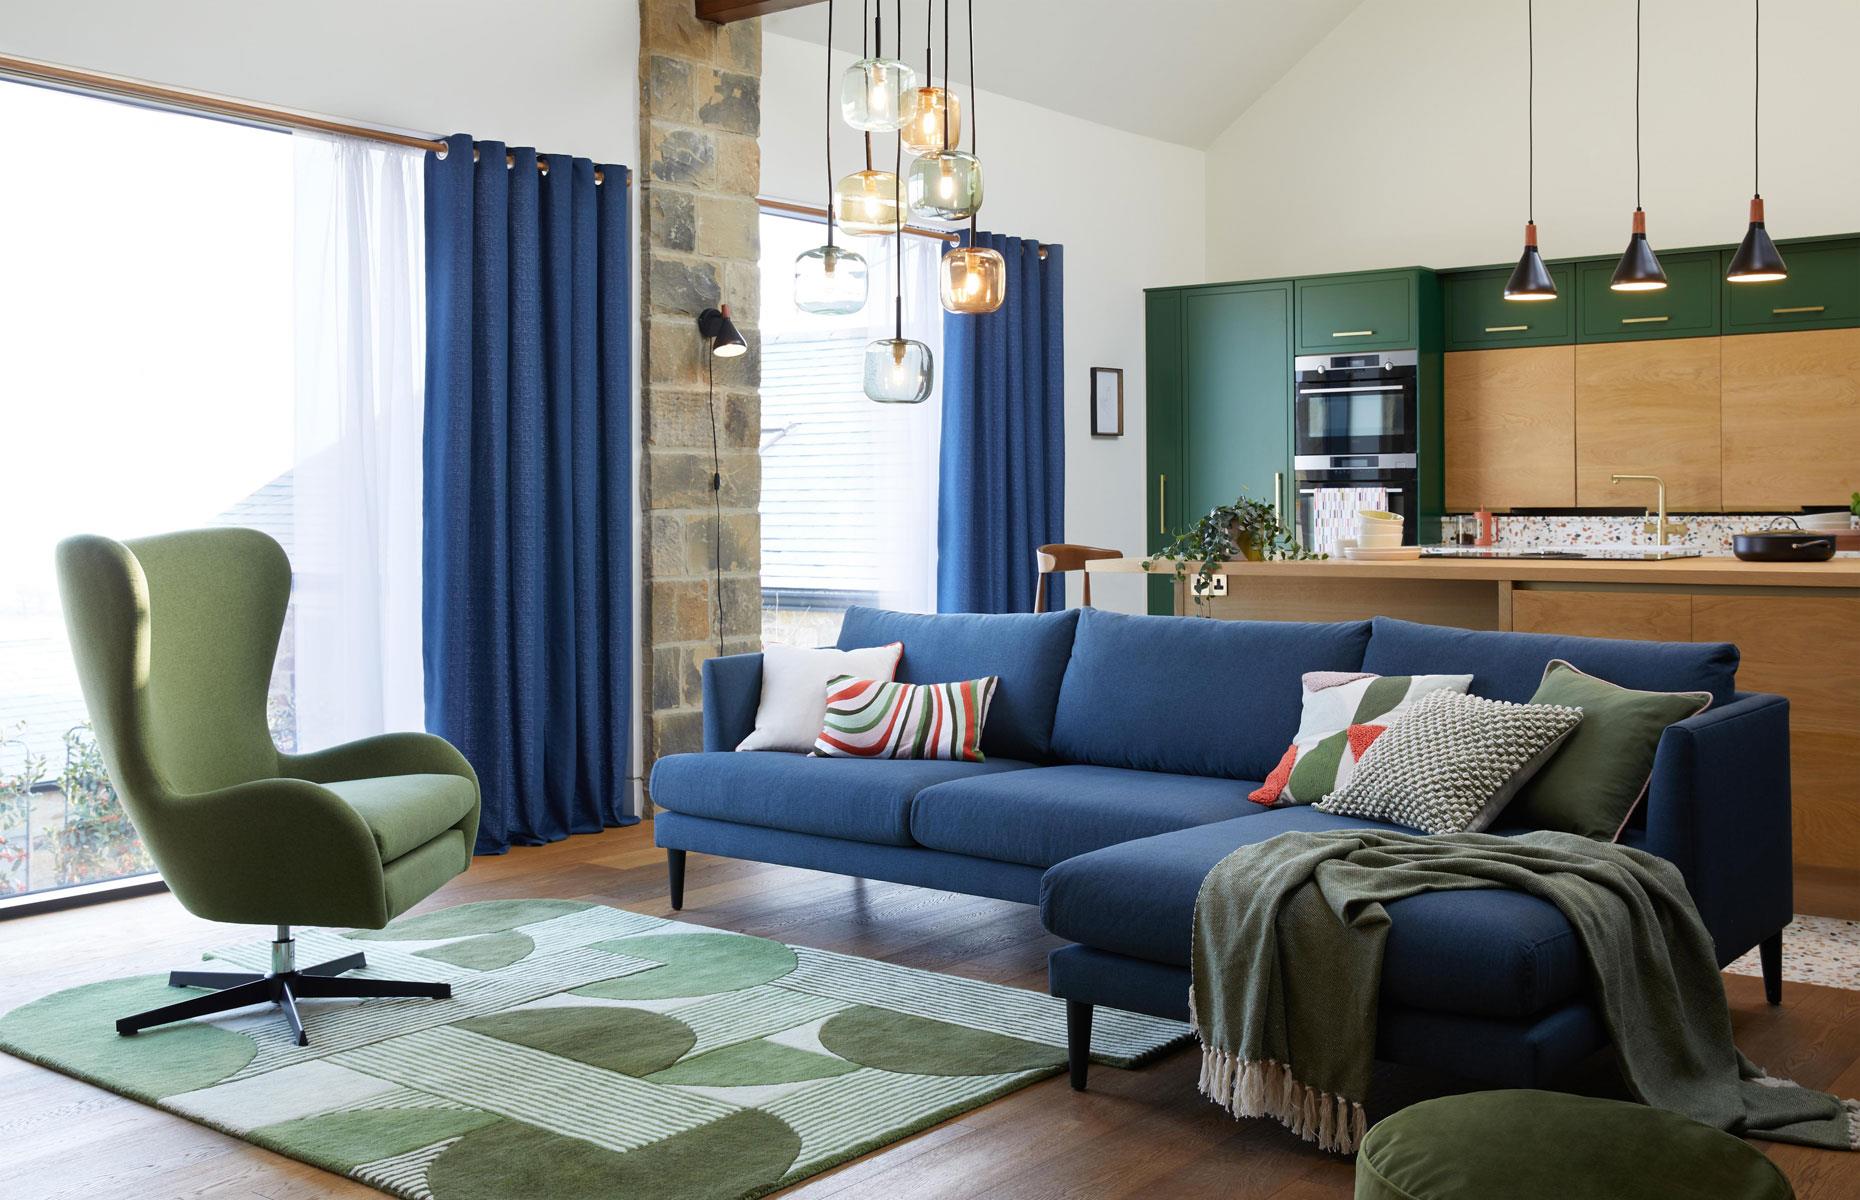 <p>In a smaller open-plan space such as an apartment use the same colors throughout to keep the room organized and unified. Here, green modern forest green kitchen cabinetry is linked to the living space by green soft furnishings. A striking blue couch blends with matching blue curtains on both the living room and kitchen windows.</p>